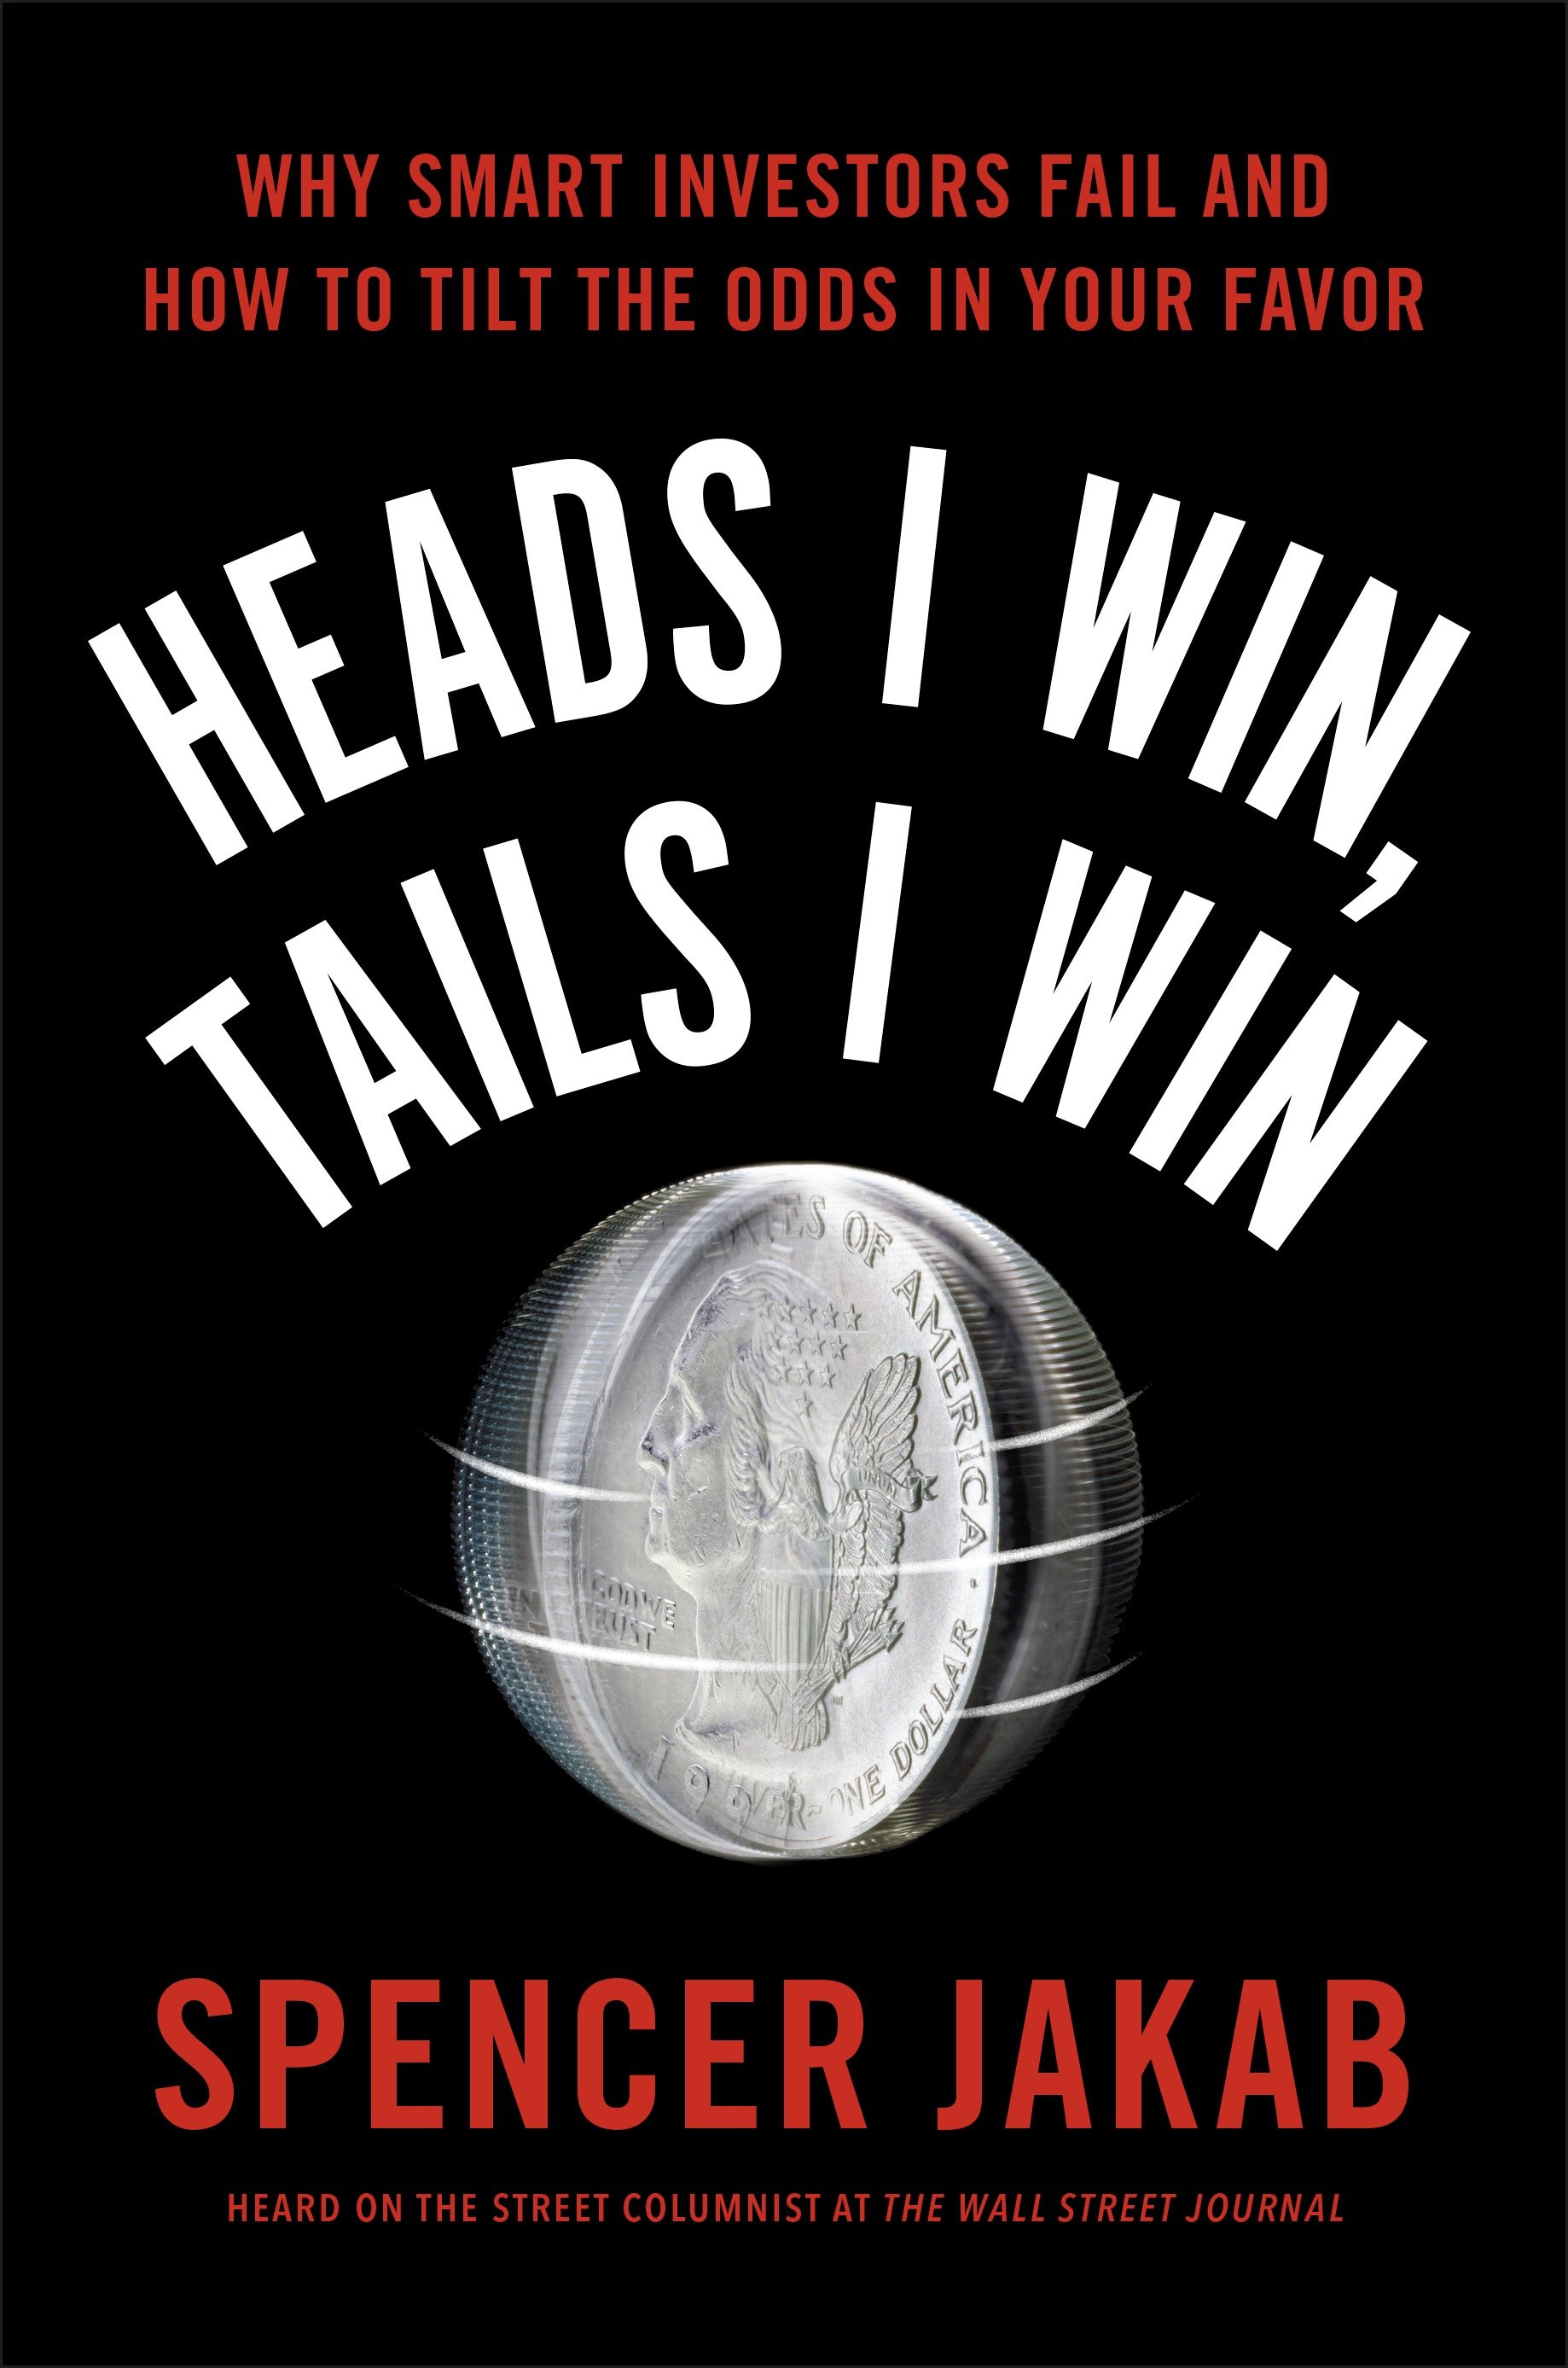 Umschlagbild für Heads I Win, Tails I Win [electronic resource] : Why Smart Investors Fail and How to Tilt the Odds in Your Favor